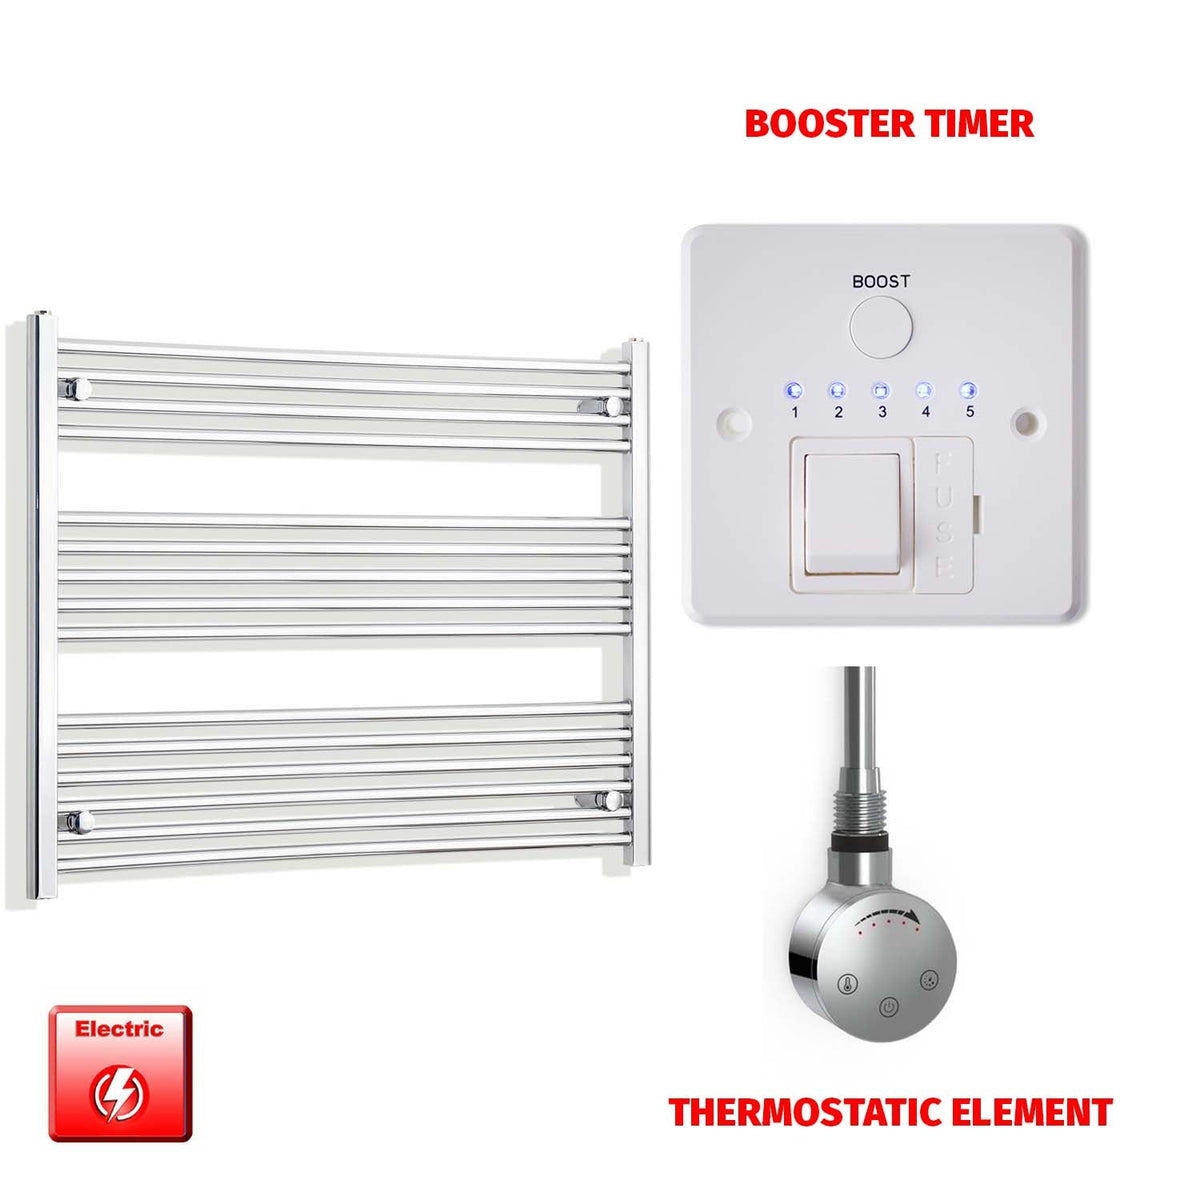 800mm High 950mm Wide Pre-Filled Electric Heated Towel Rail Radiator Straight Chrome MOA Thermostatic element Booster timer